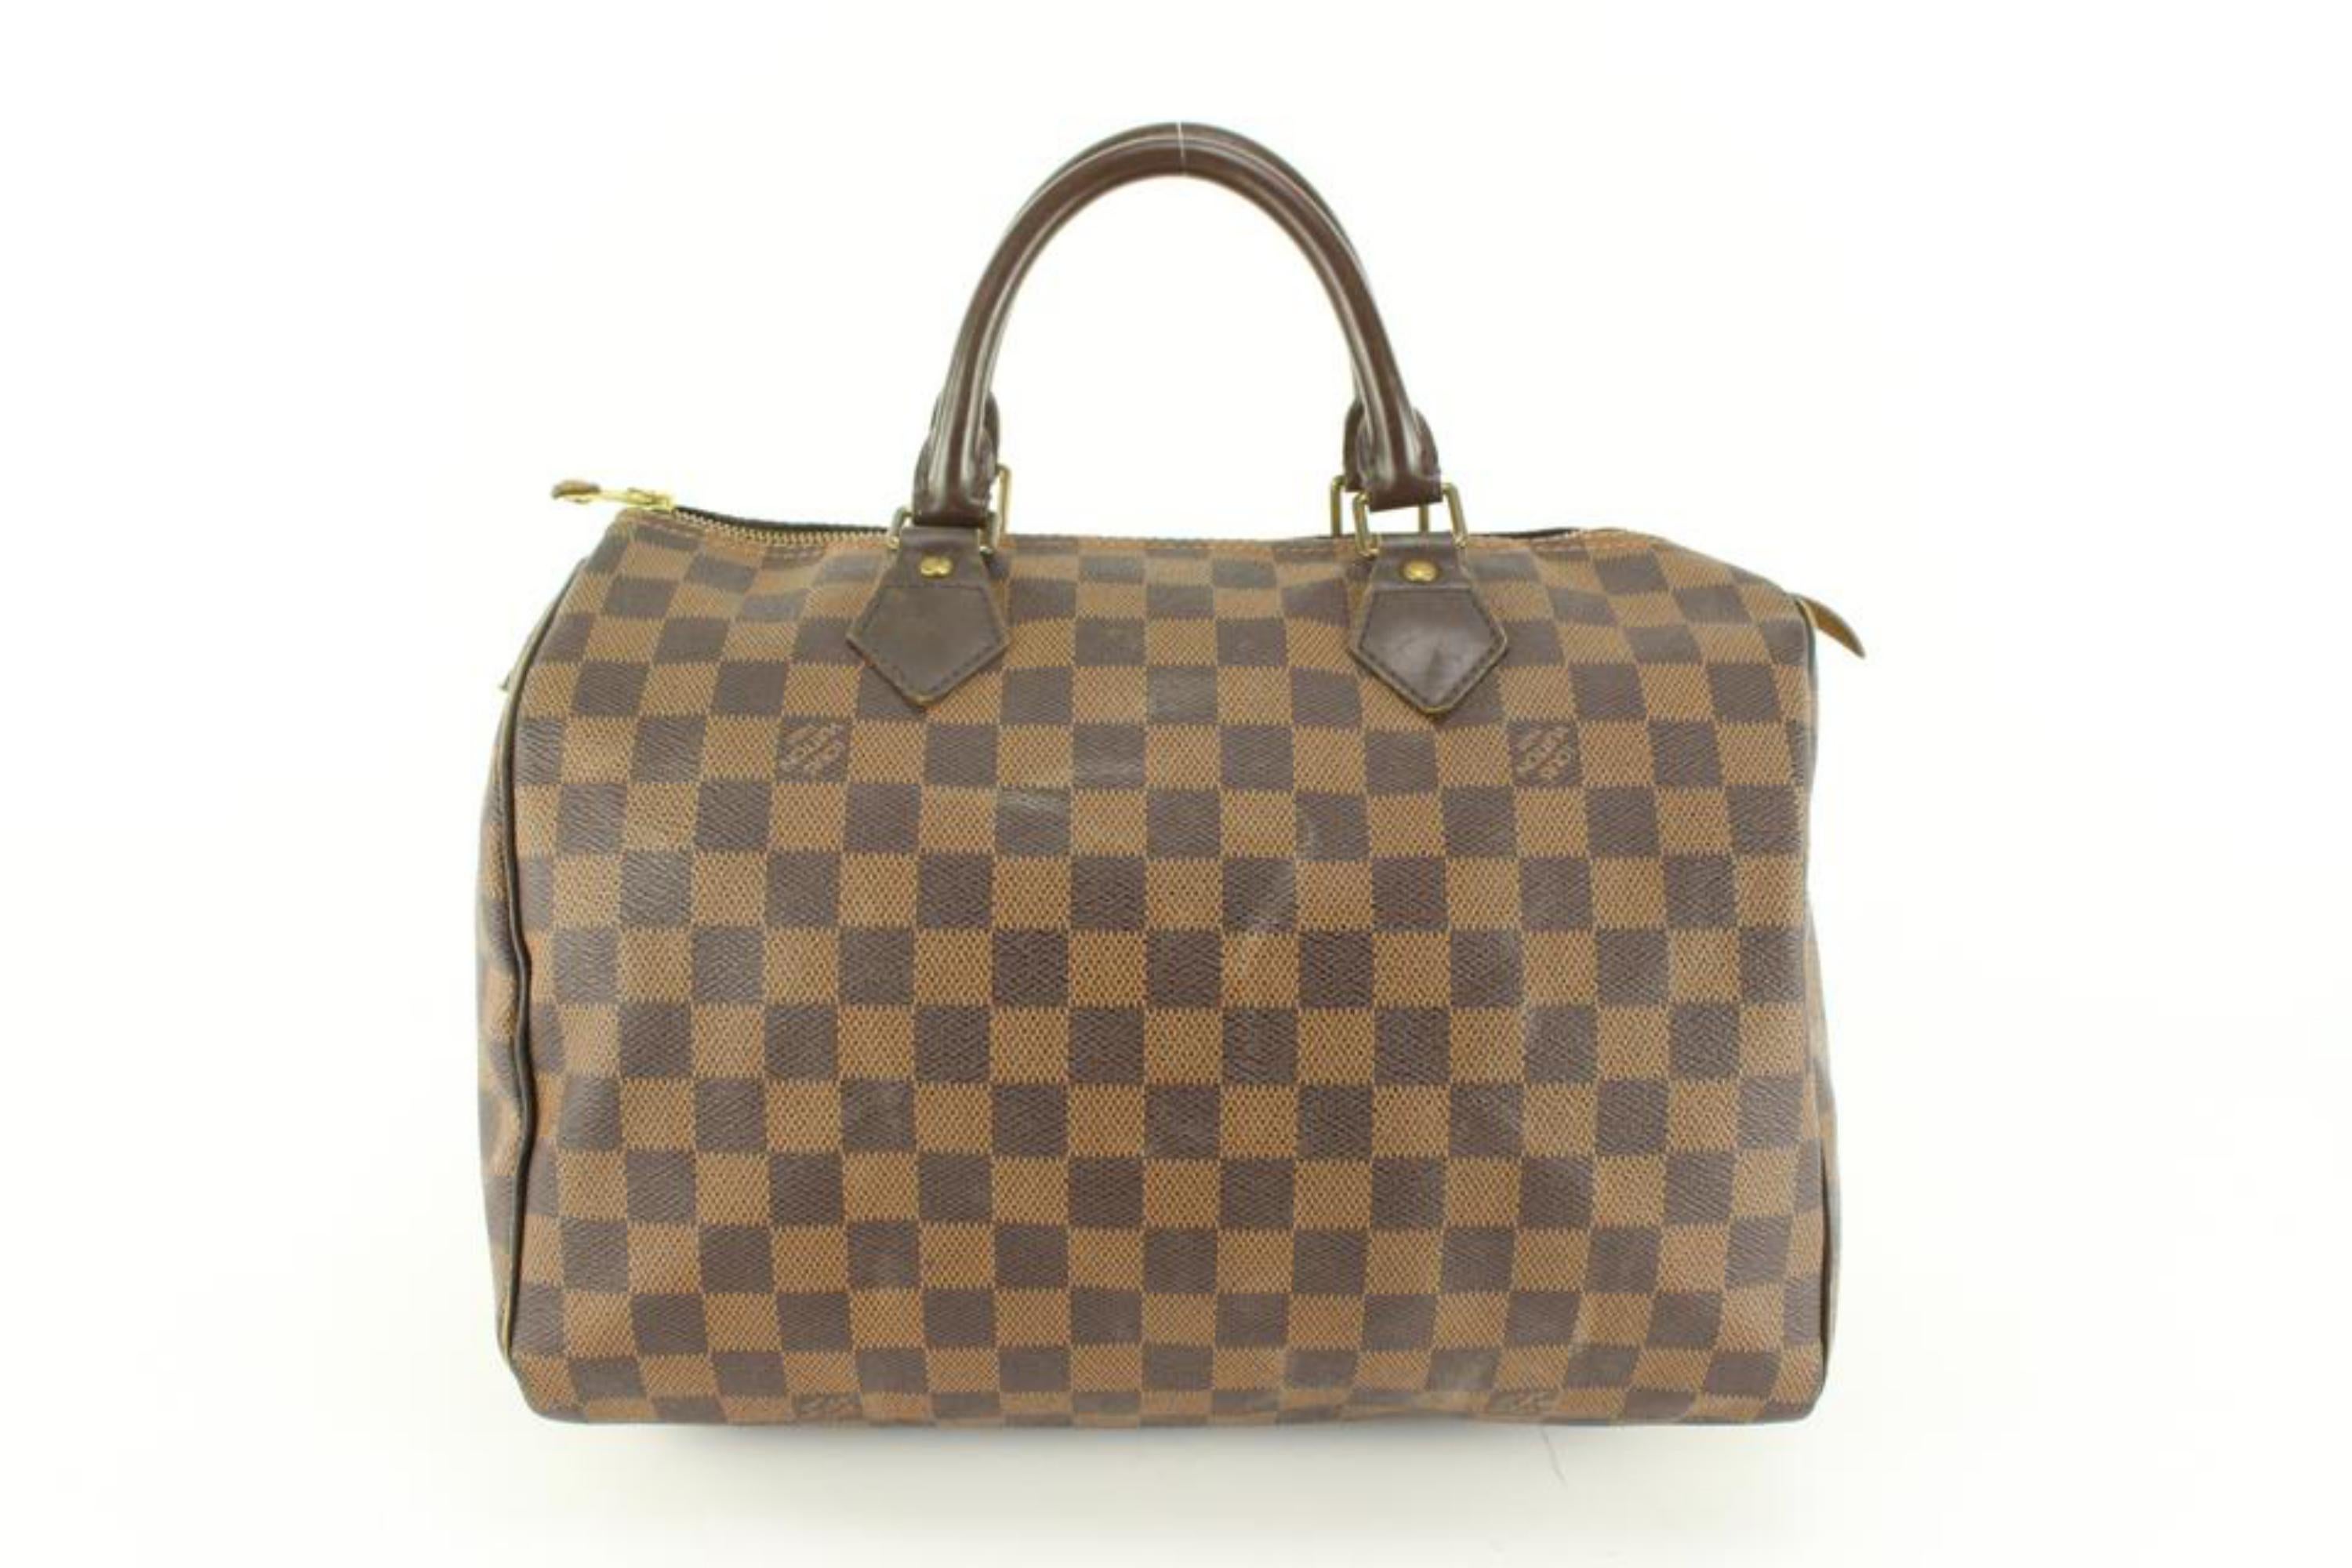 Louis Vuitton Damier Ebene Speedy 30 Boston 1lz526s In Good Condition For Sale In Dix hills, NY